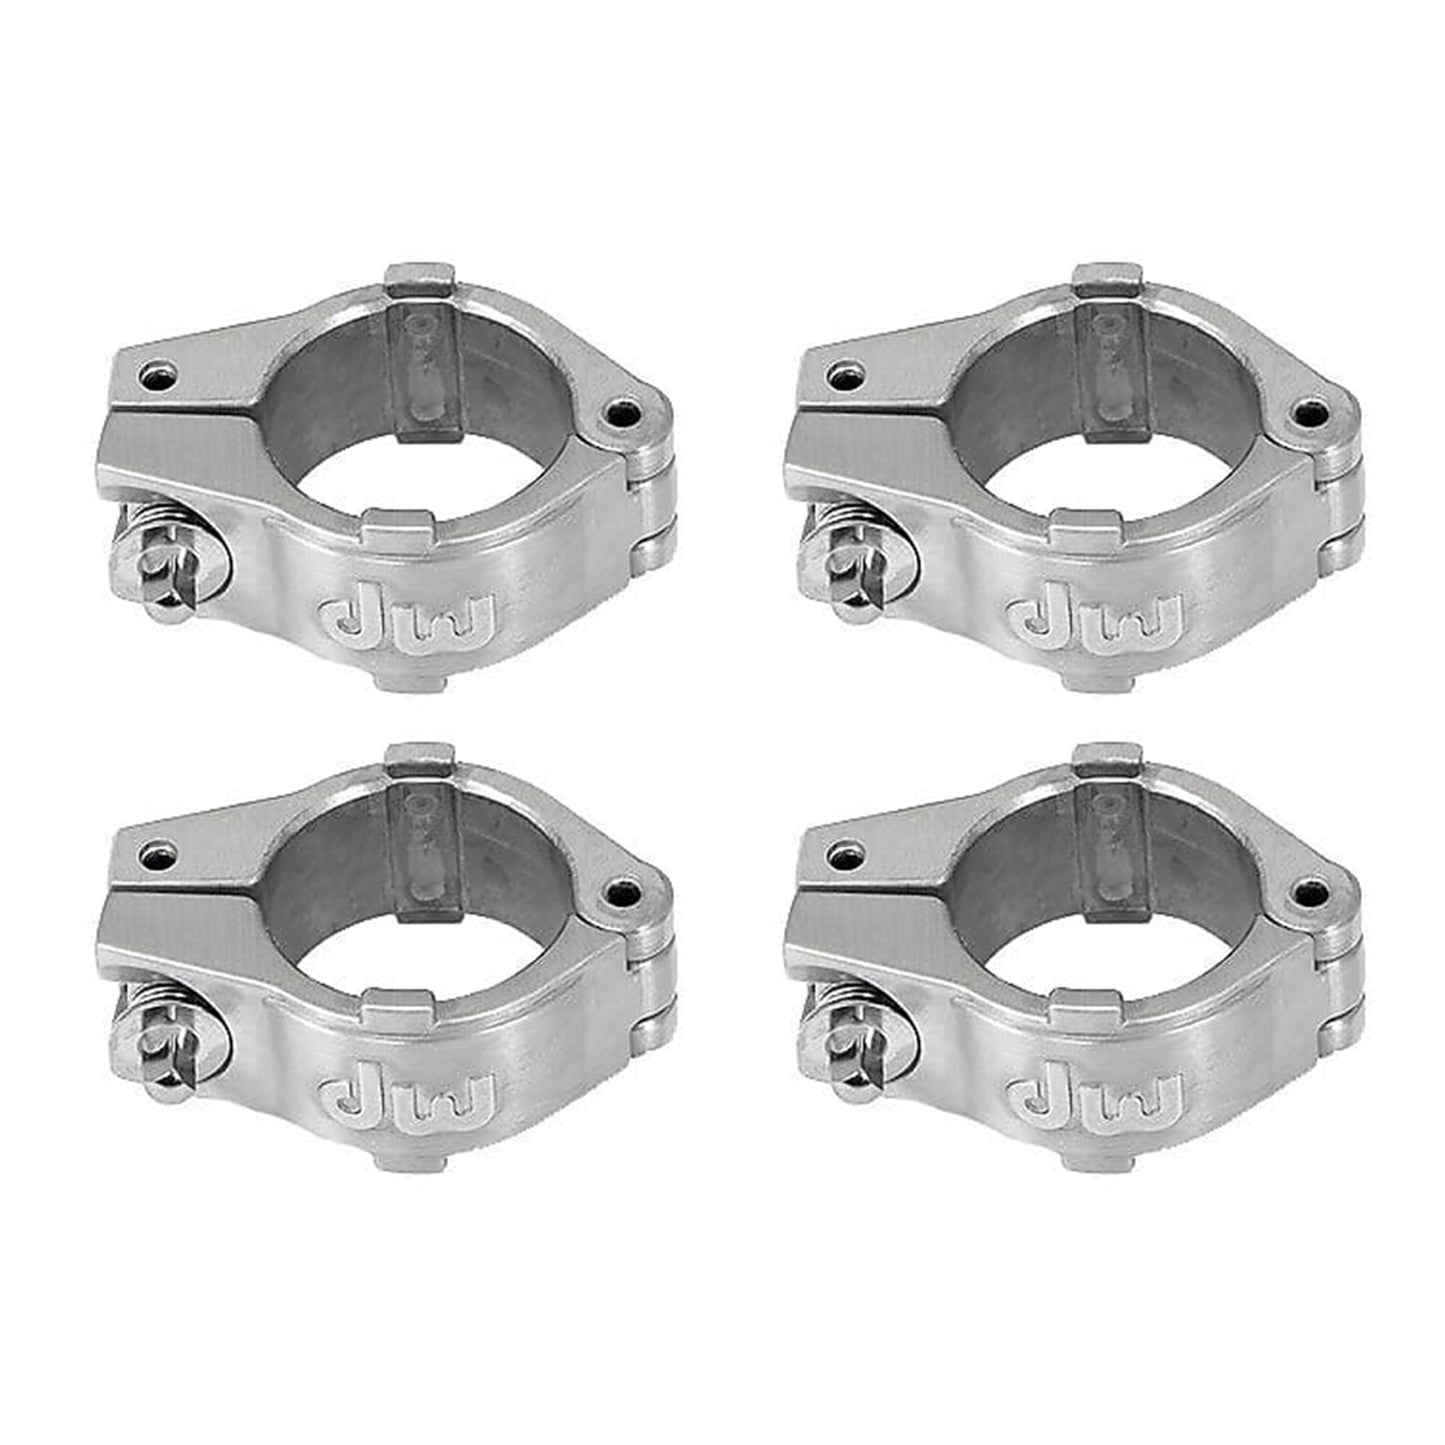 DW Rack 1.5" Hinged Memory Lock (4 Pack Bundle) Drums and Percussion / Parts and Accessories / Drum Parts